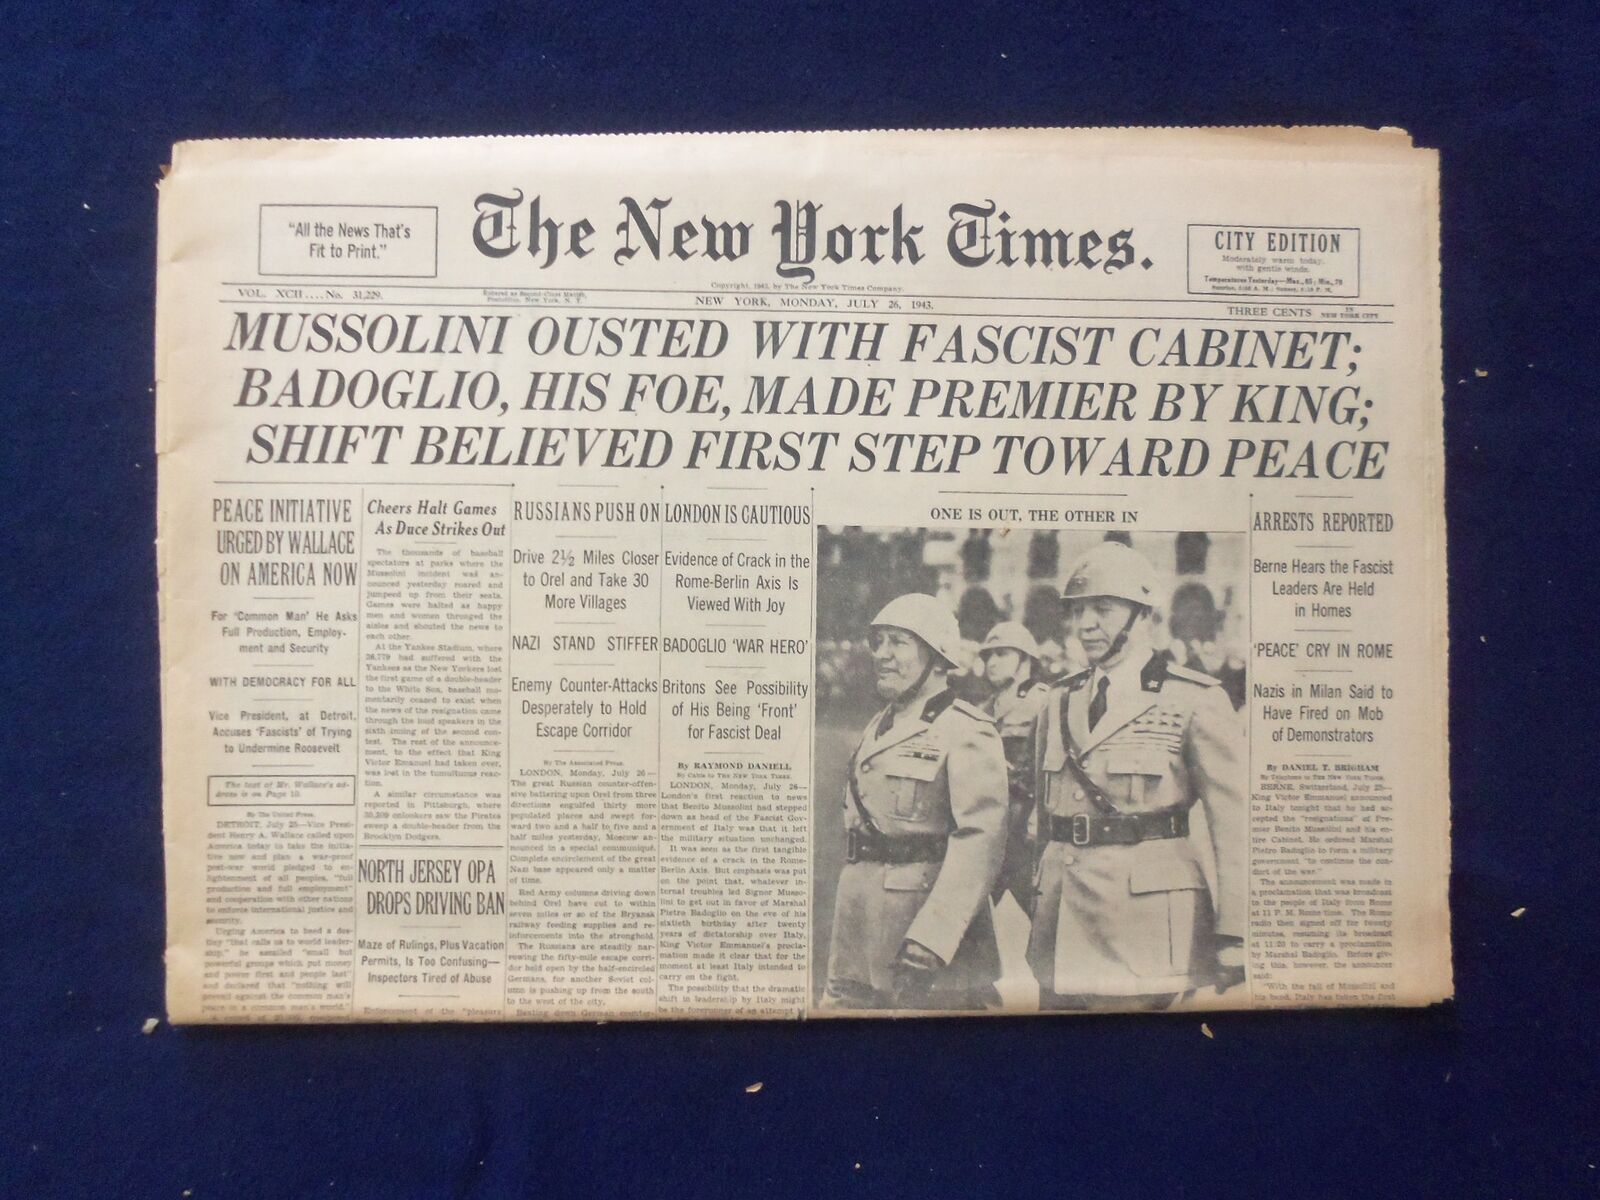 1943 JULY 26 NEW YORK TIMES - MUSSOLINI OUSTED WITH FASCIST CABINET - NP 6470